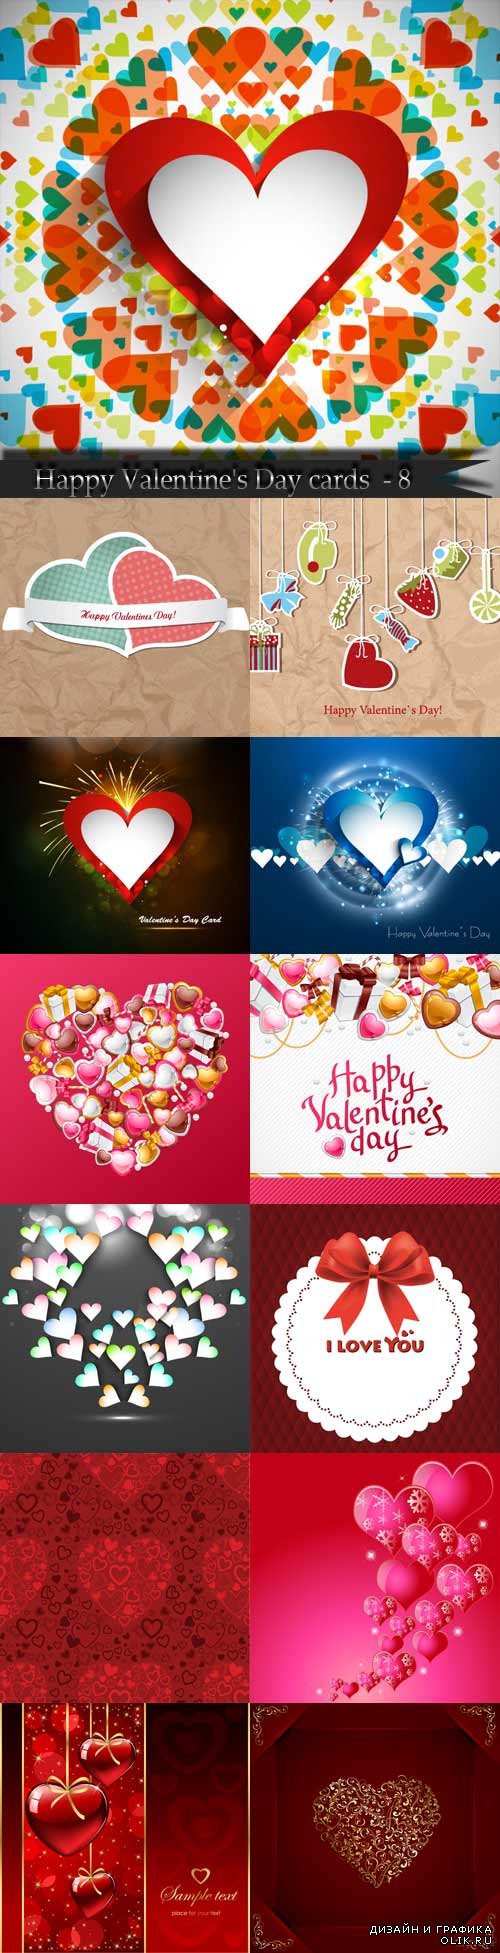 Happy Valentine's Day cards and backgrounds - 8